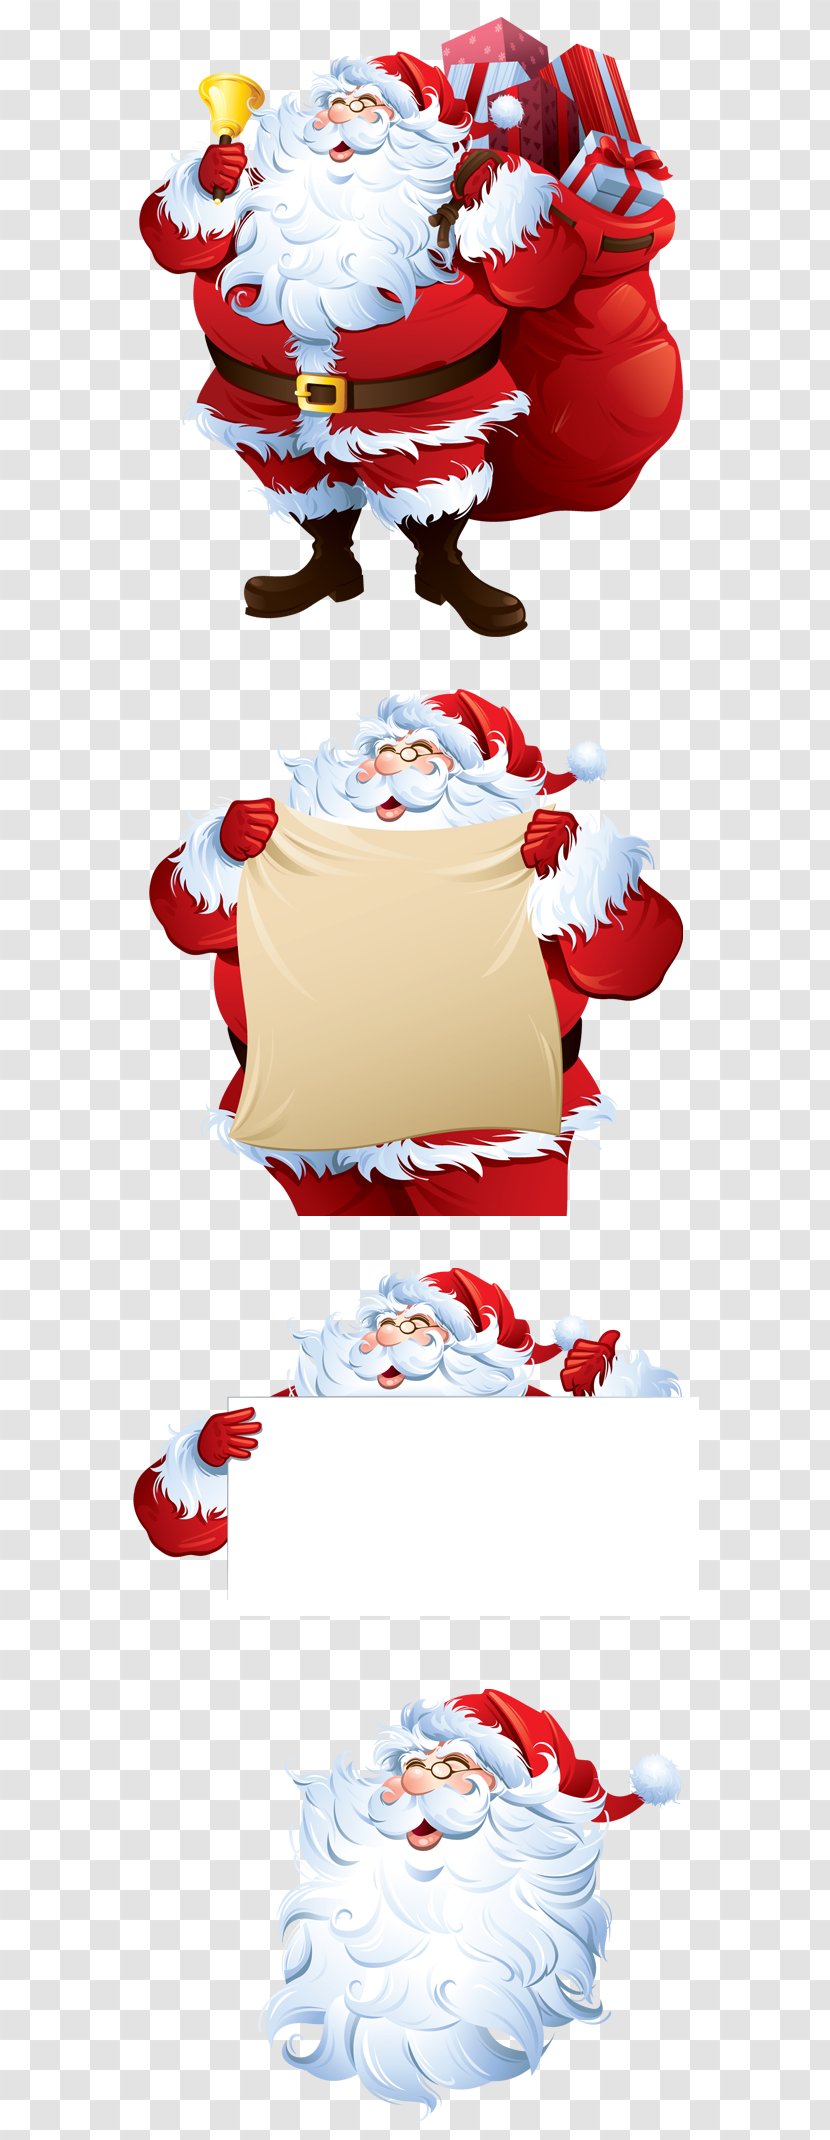 Santa Claus Vector Graphics Christmas Day Image - Photography Transparent PNG